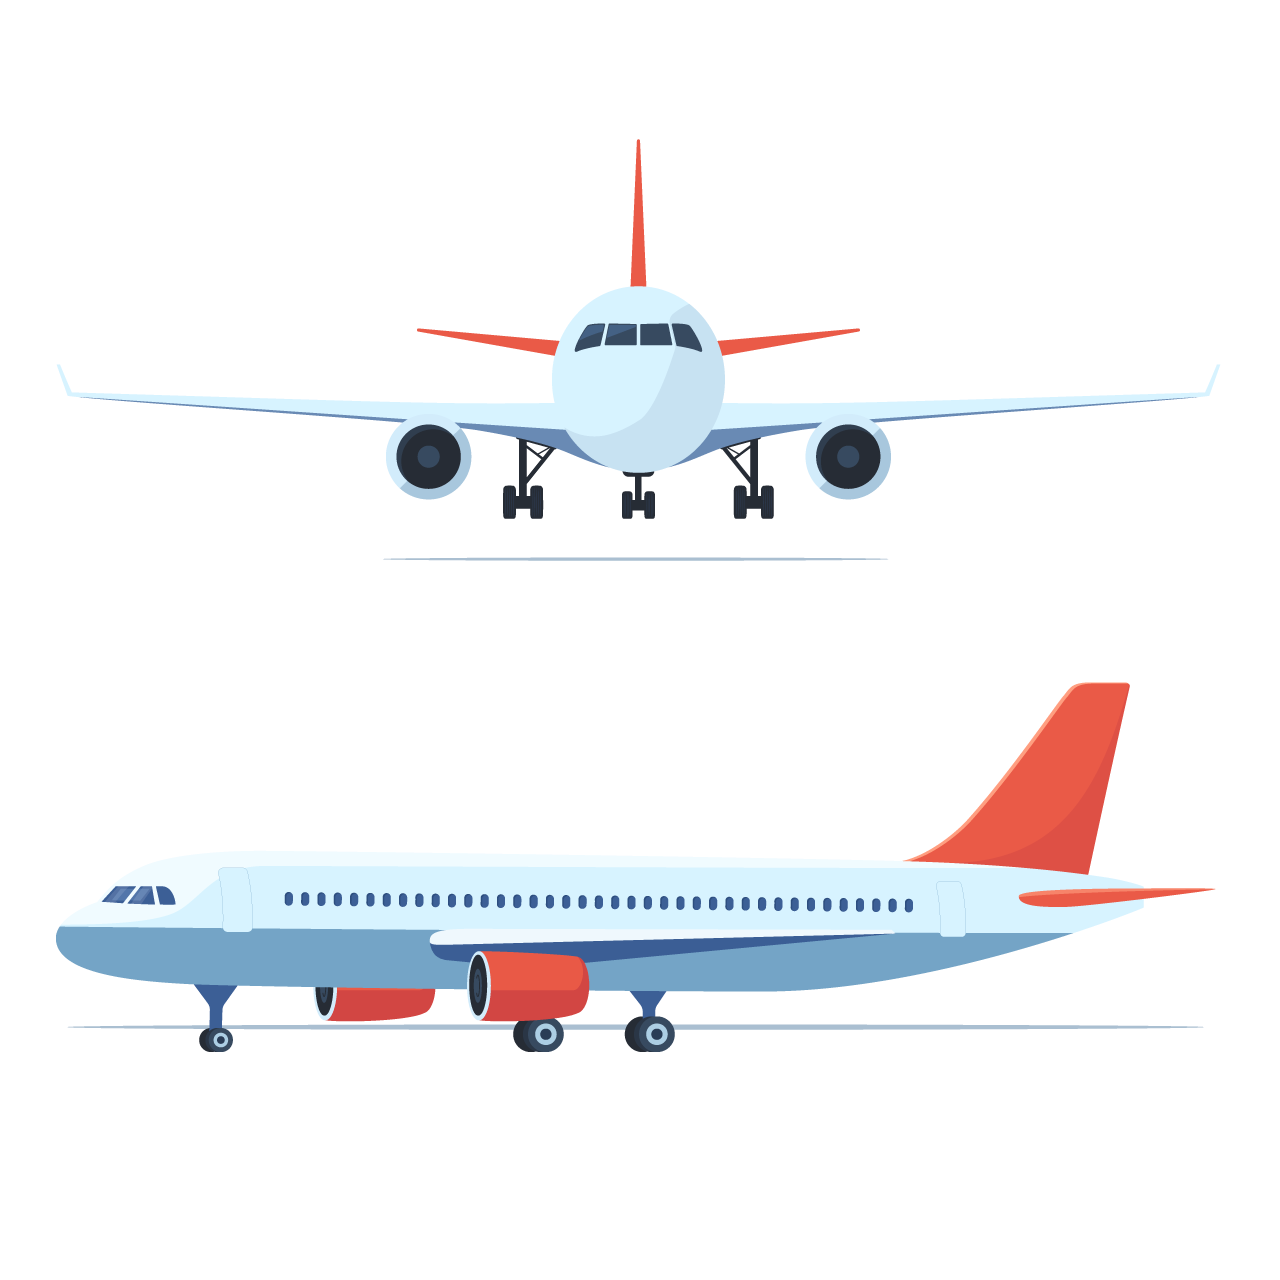 Large passenger airplane front side view illustration